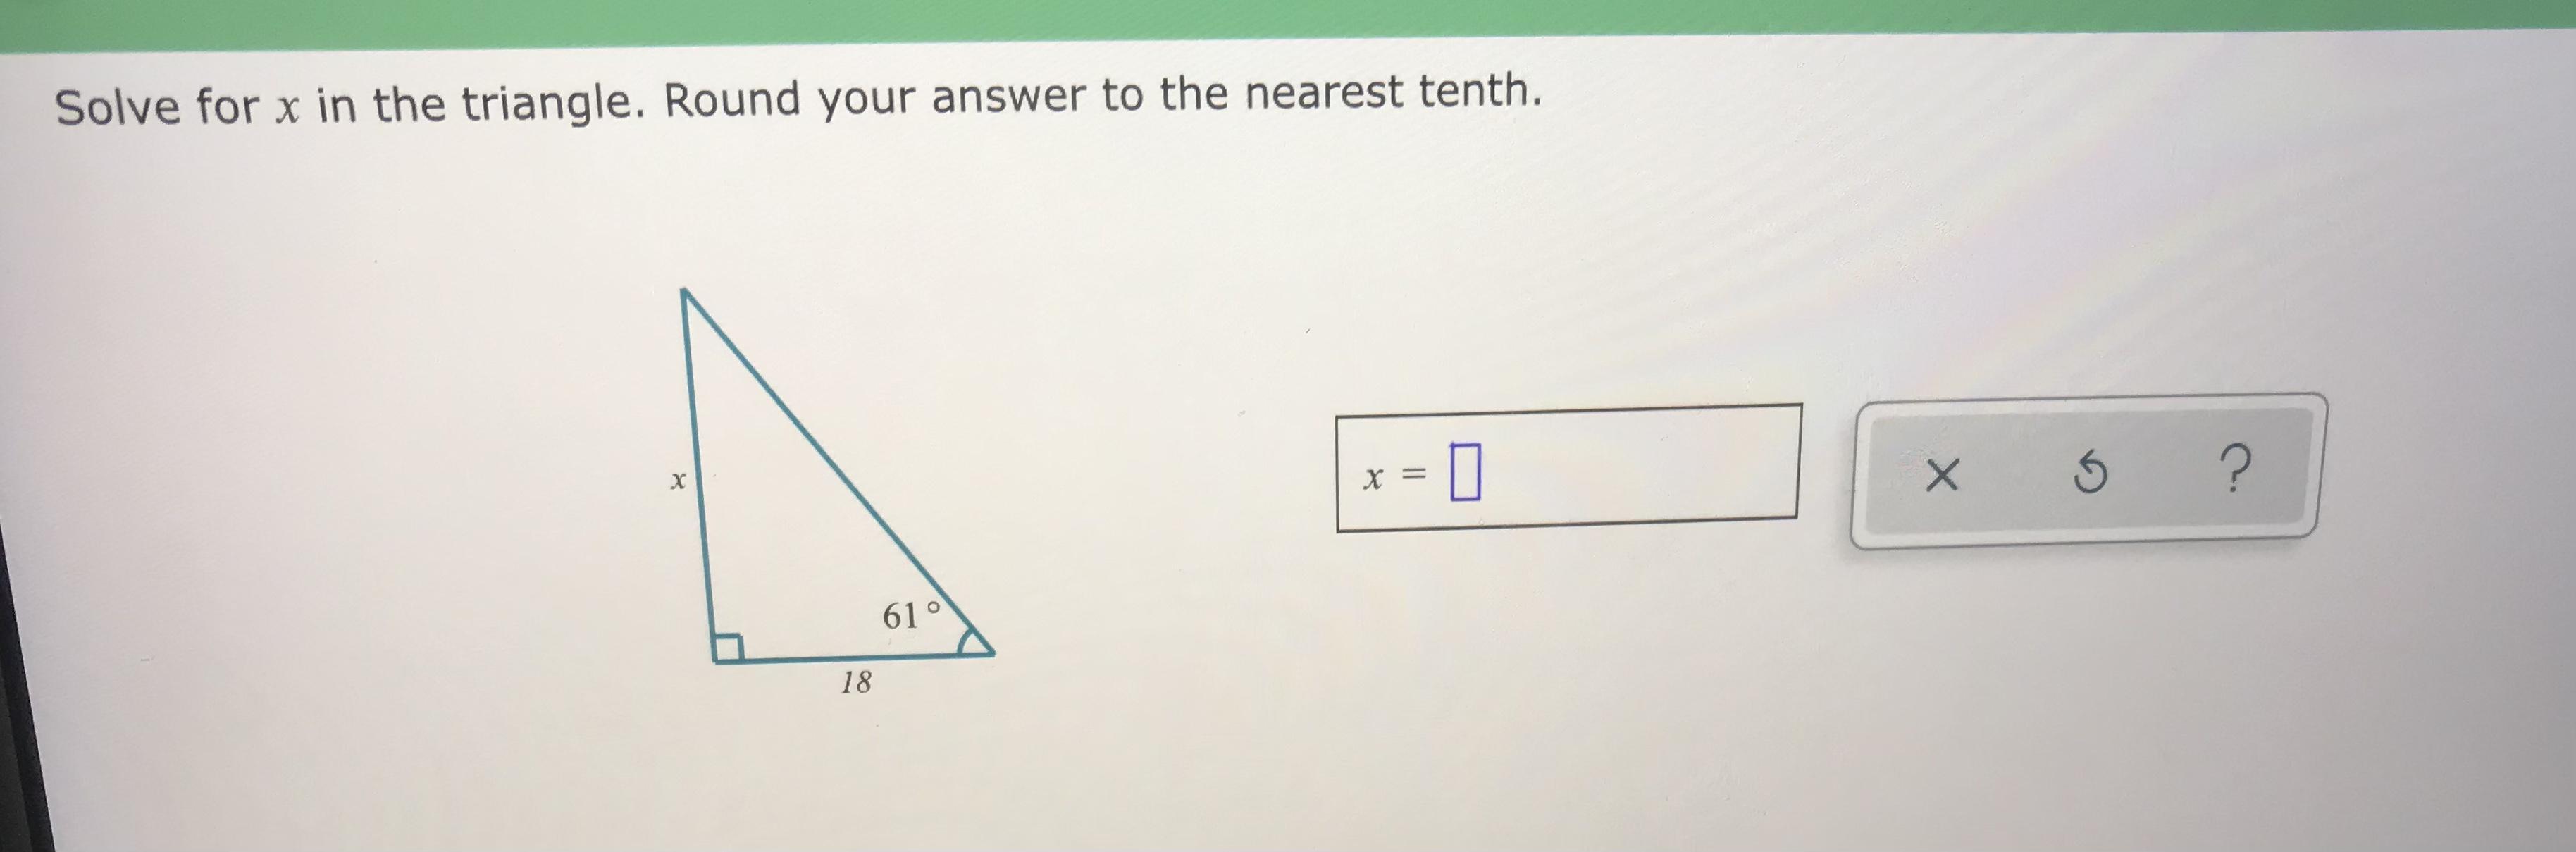 NEED HELP ASAP, WILL GIVE BRAINLIESTSolve For X In The Triangle. Round Your Answer To The Nearest Tenth.